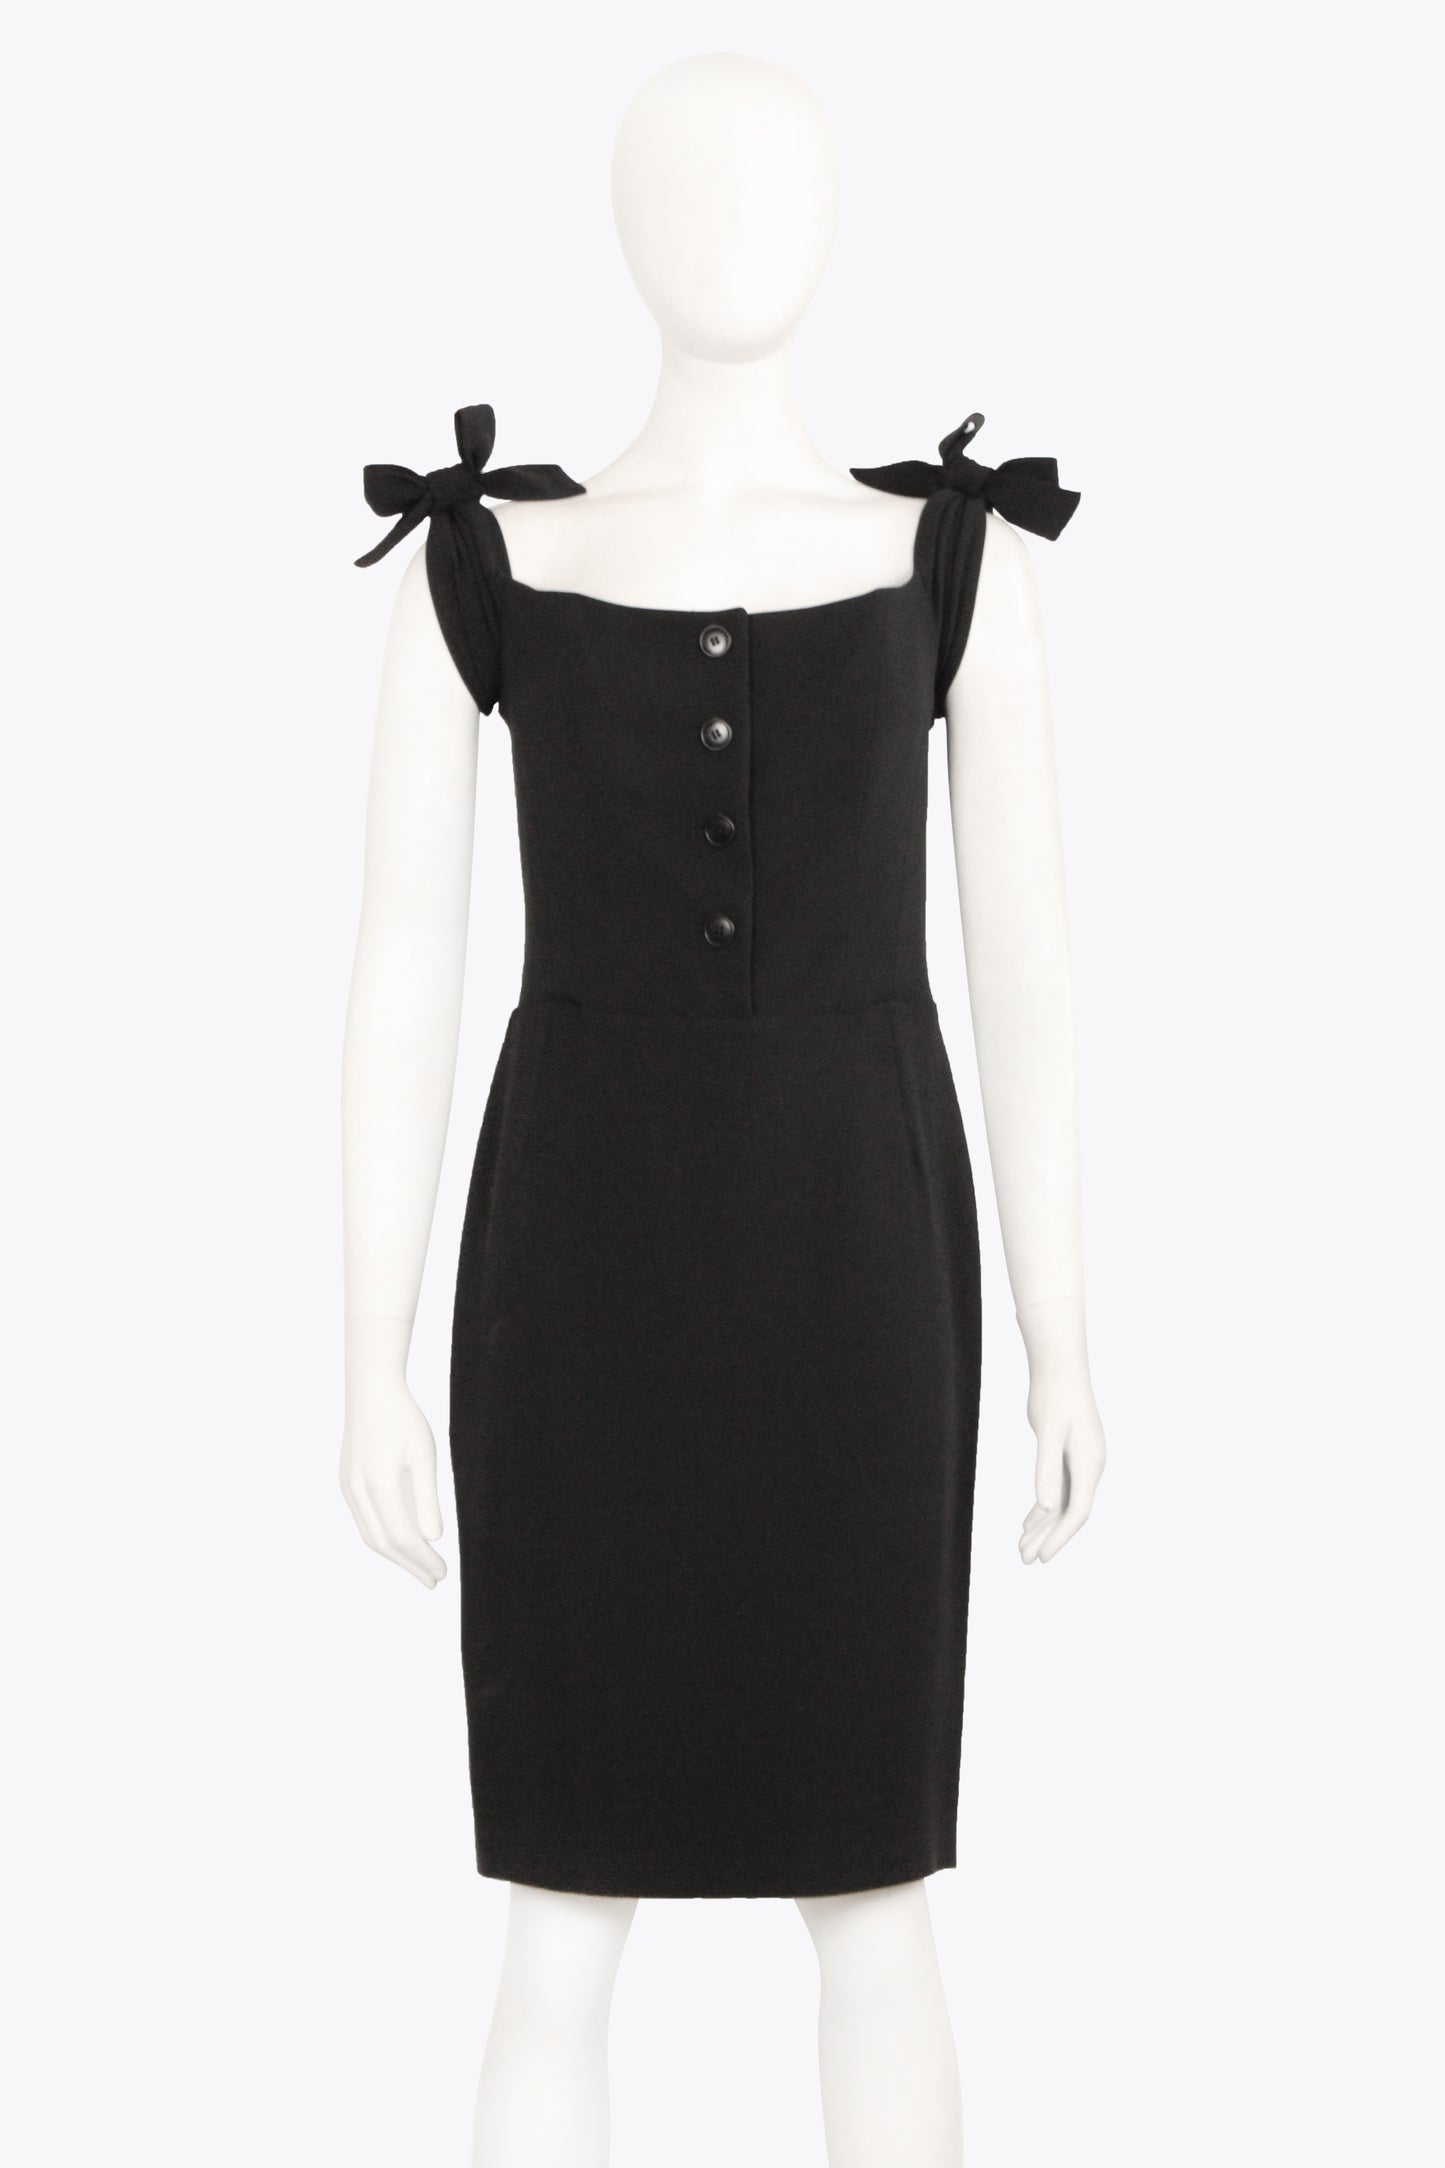 Christian Dior Black Dress With Bows & Buttons